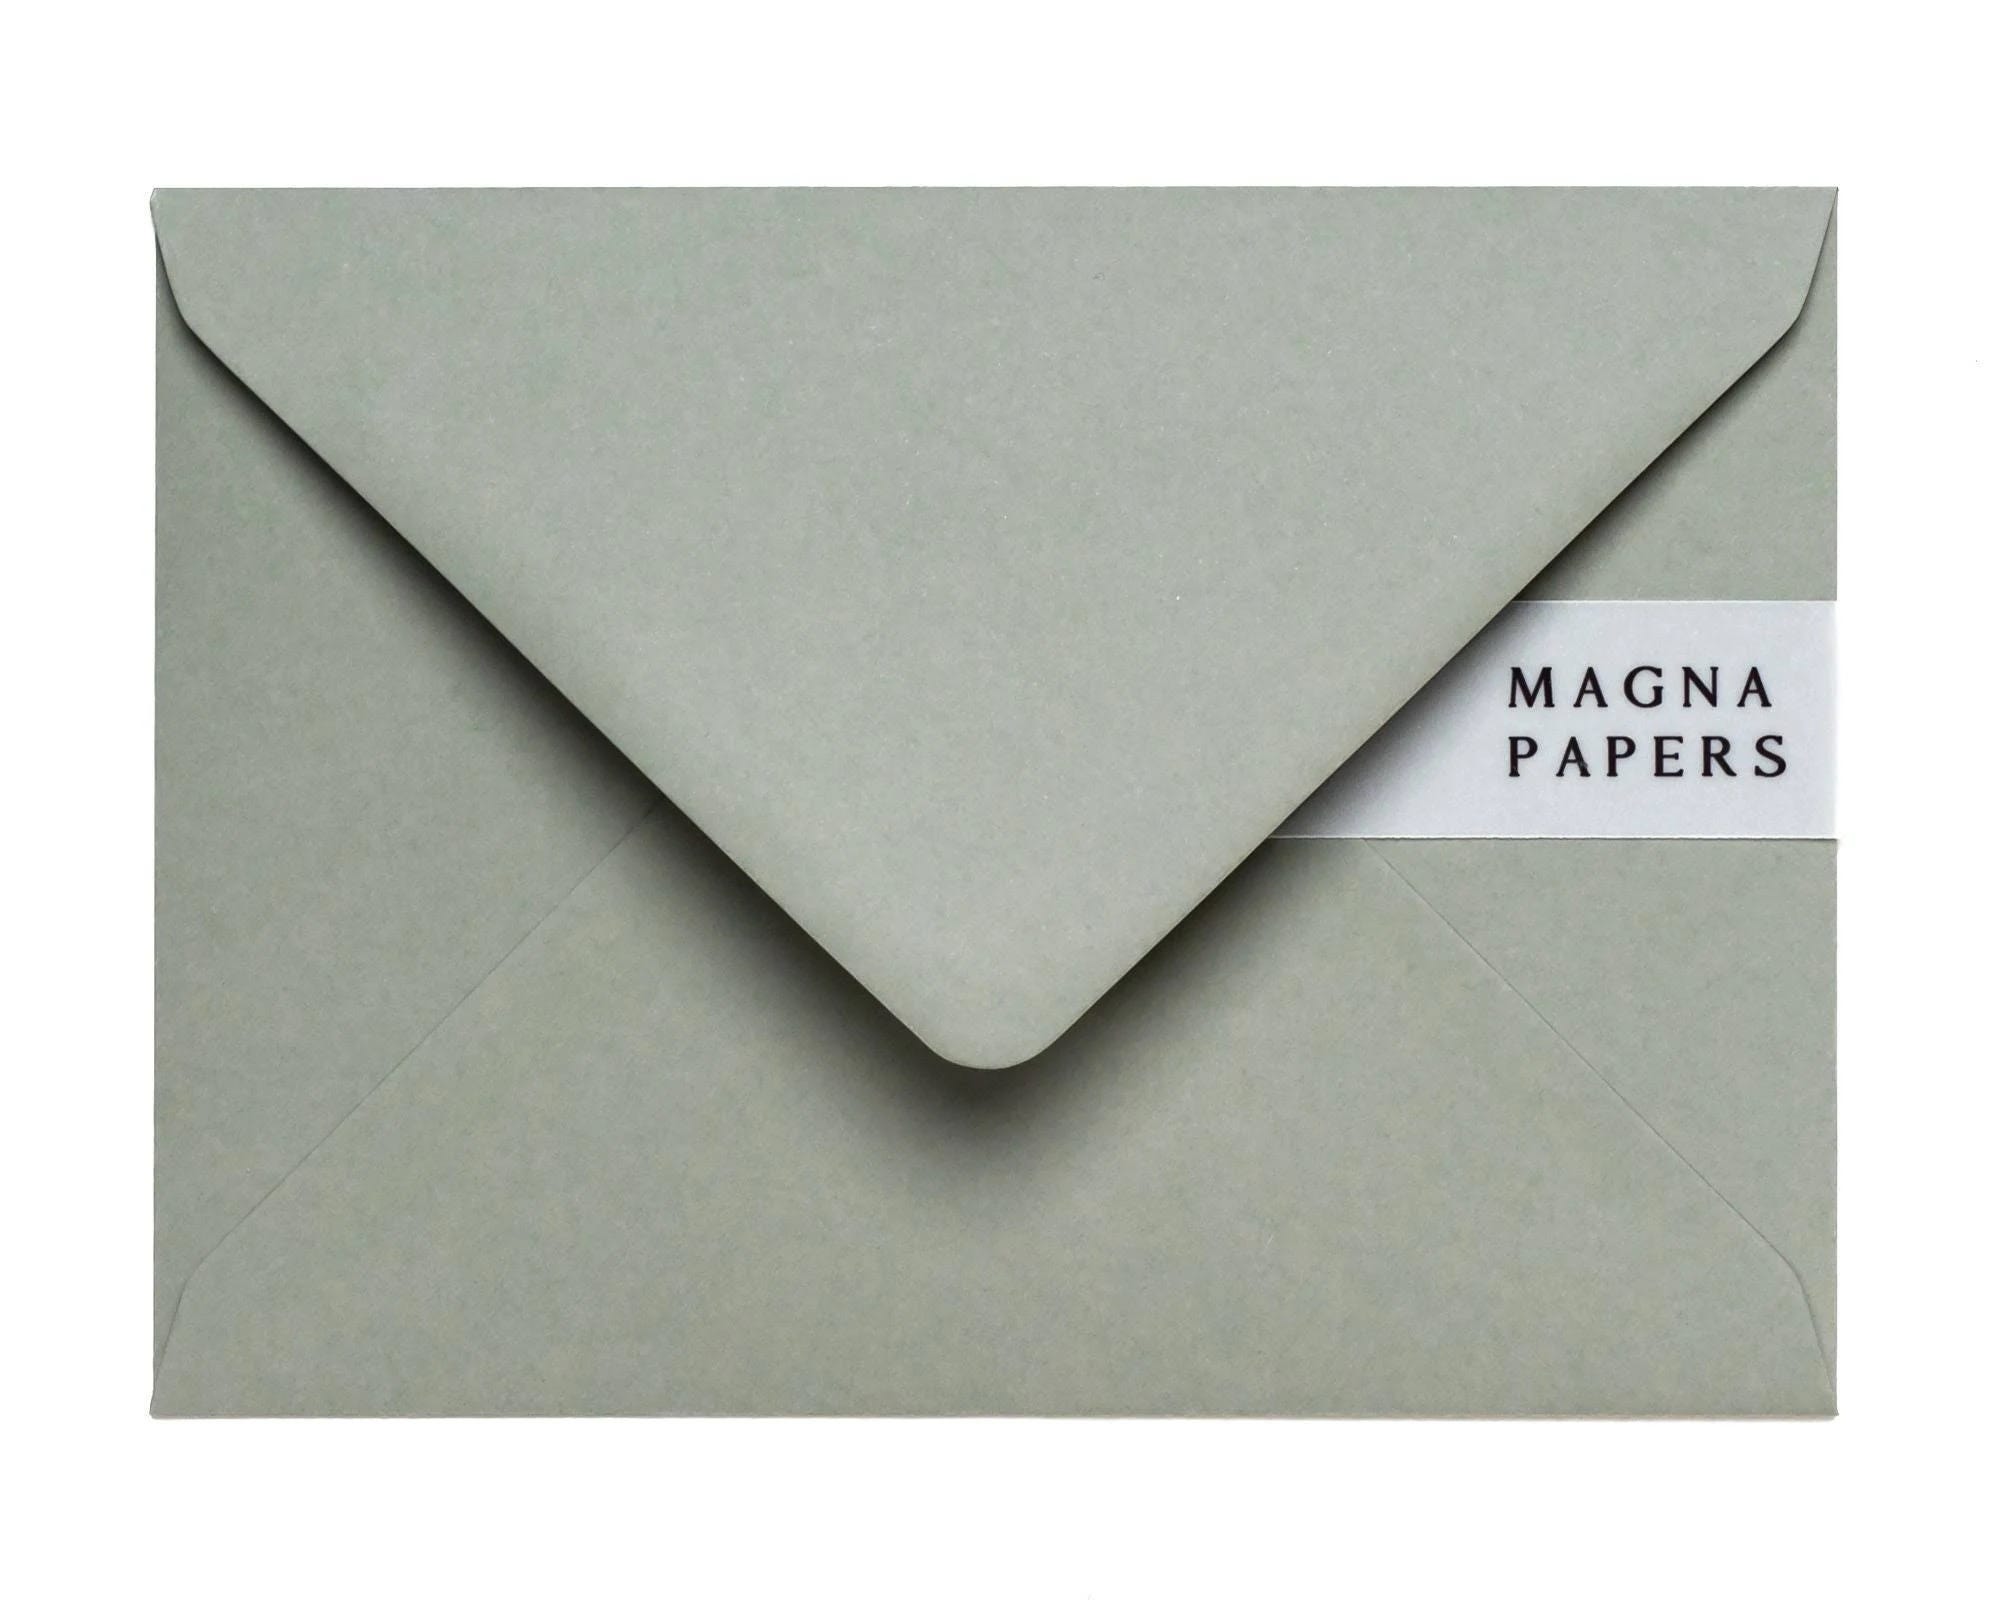 Sage Green 5x7 Invitation Envelopes: Perfect for Weddings, Events & Announcements | Image